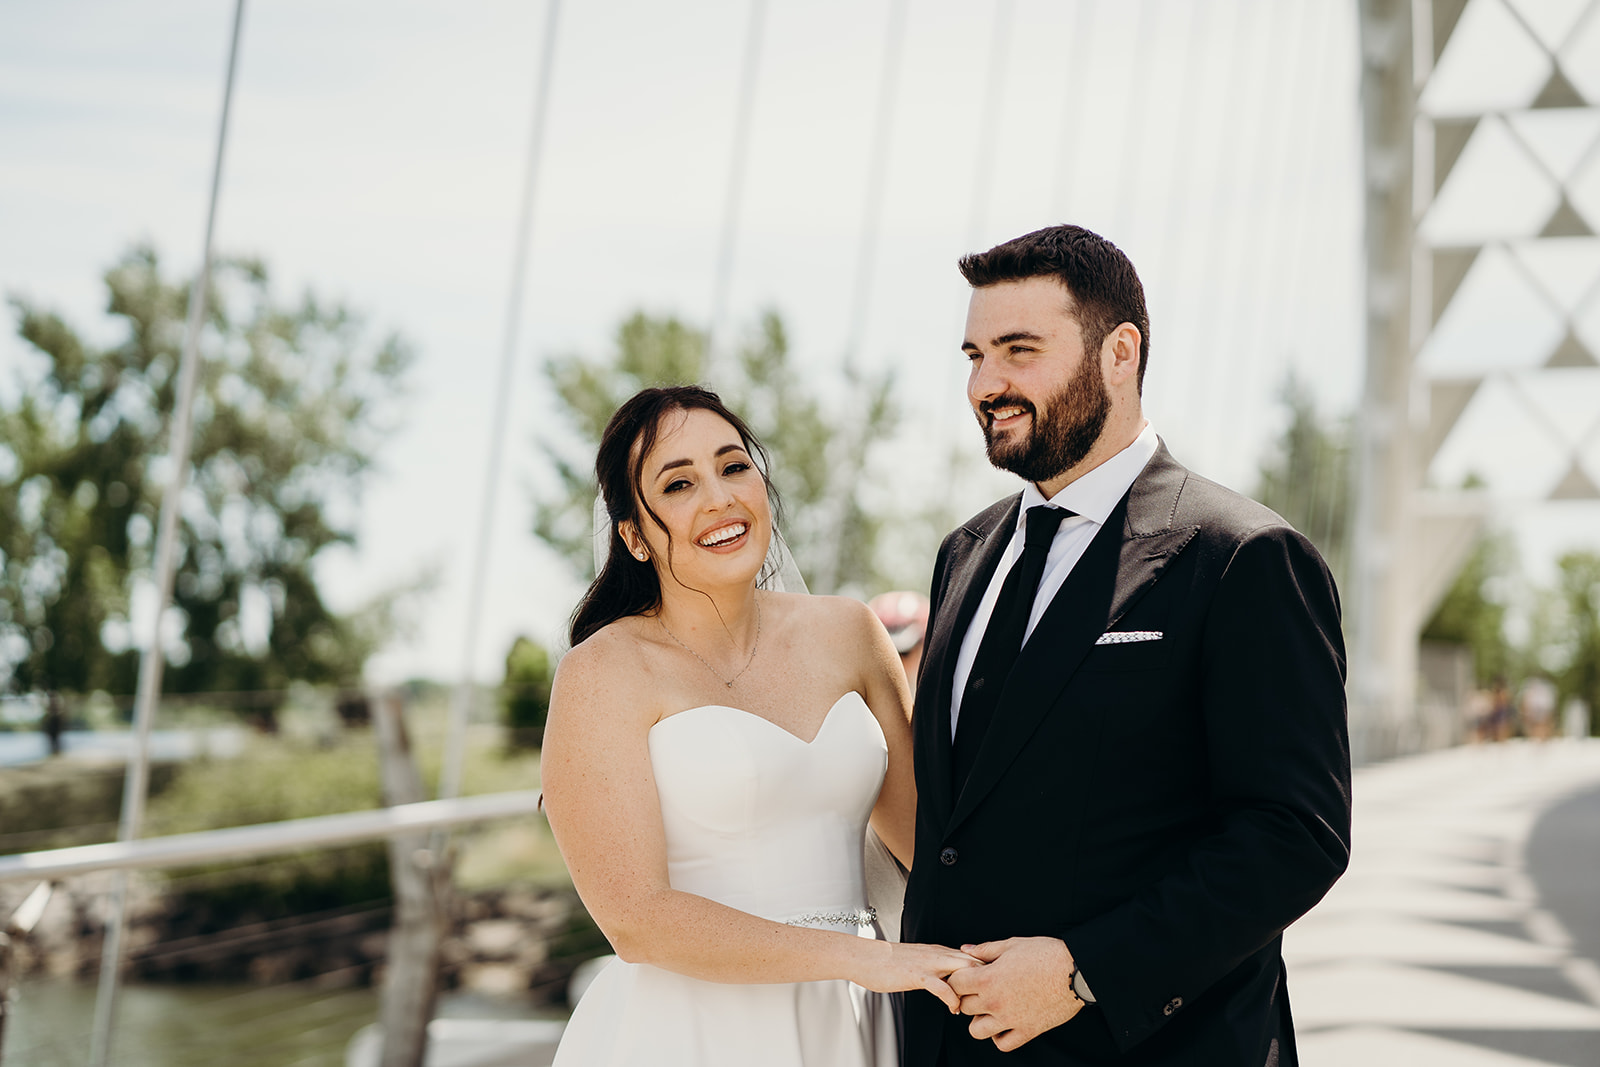 Husband and wife smiling and holding hands on the bridge outside in Toronto, Ontario.